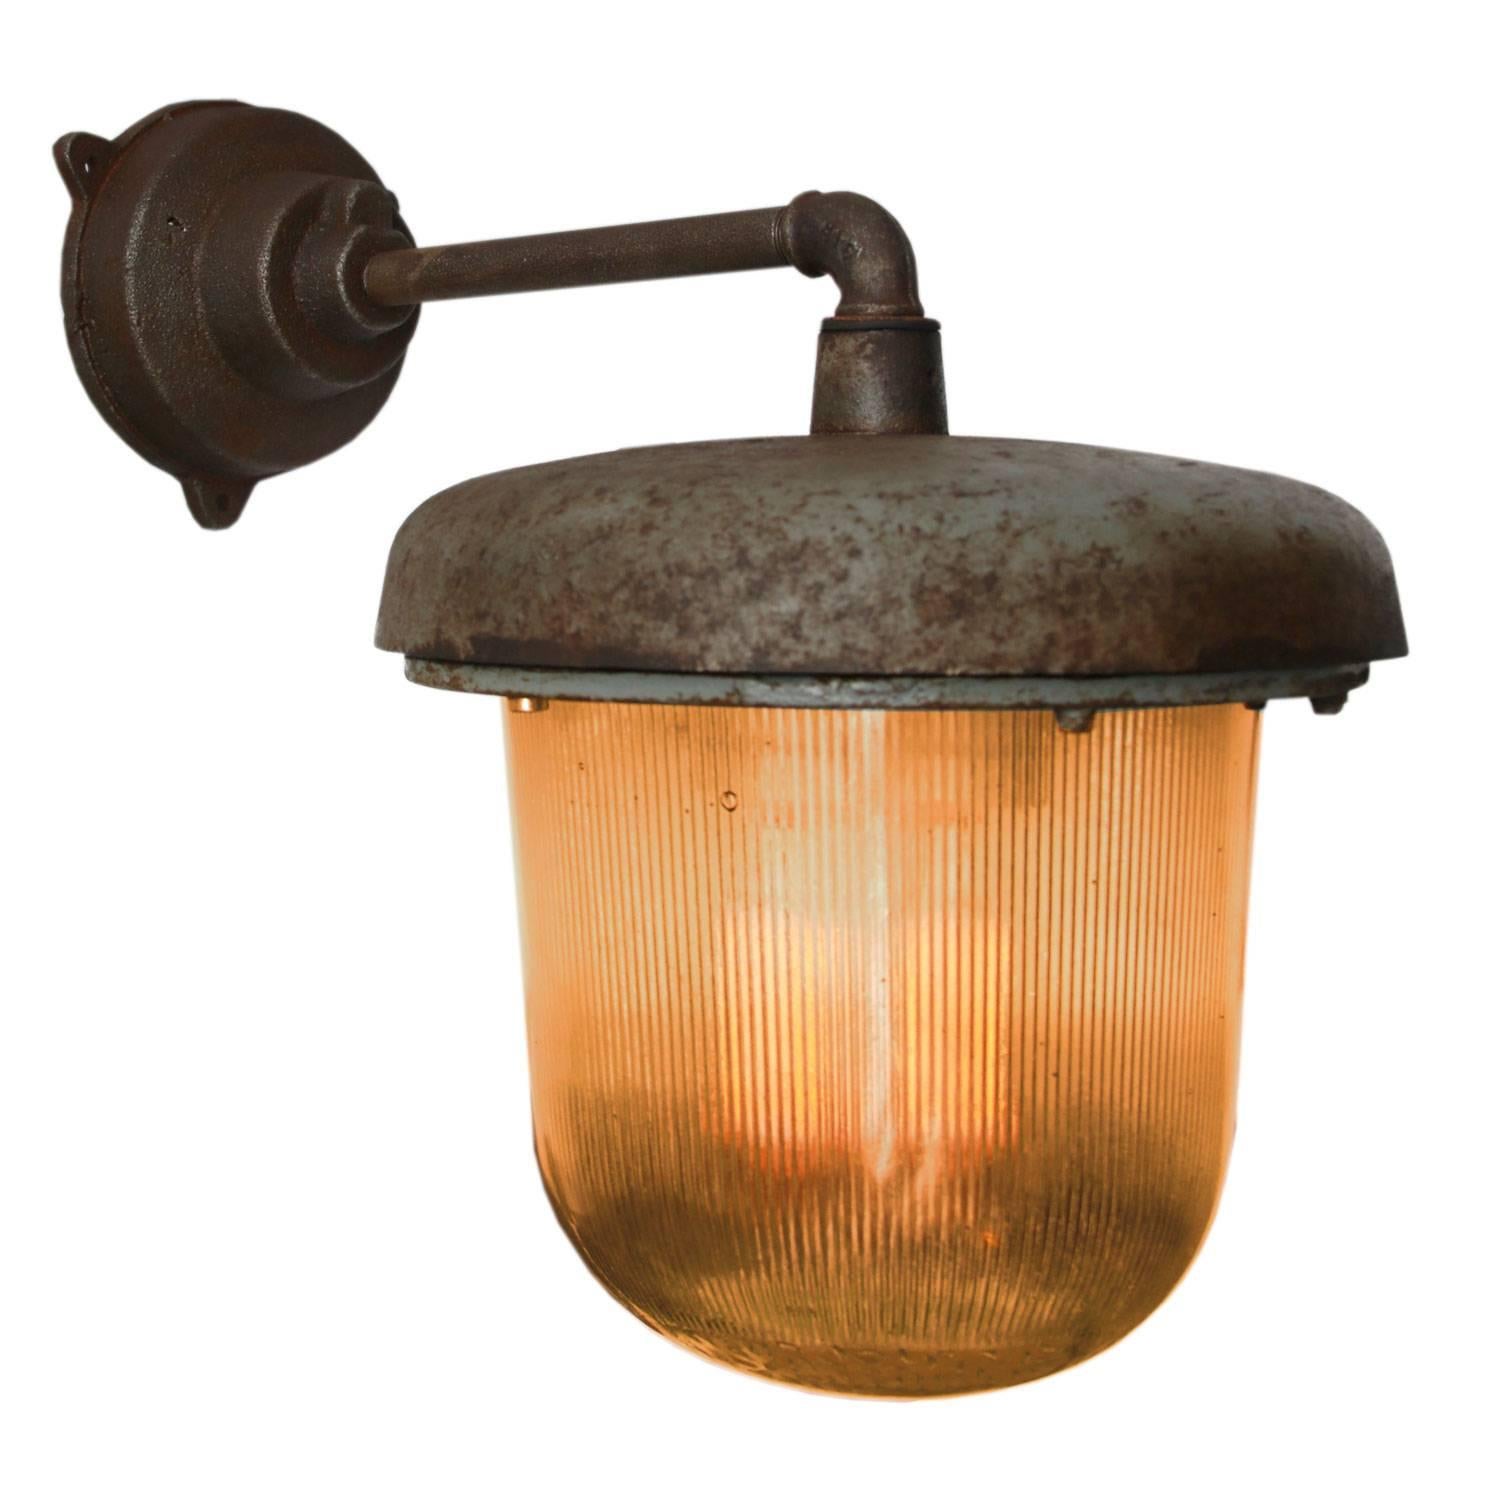 Cast iron industrial wall light. Holophane glass. Diameter cast iron wall piece: 12 cm, 3 holes to secure.

Weight: 8.5 kg / 18.7 lb

Priced per individual item. All lamps have been made suitable by international standards for incandescent light